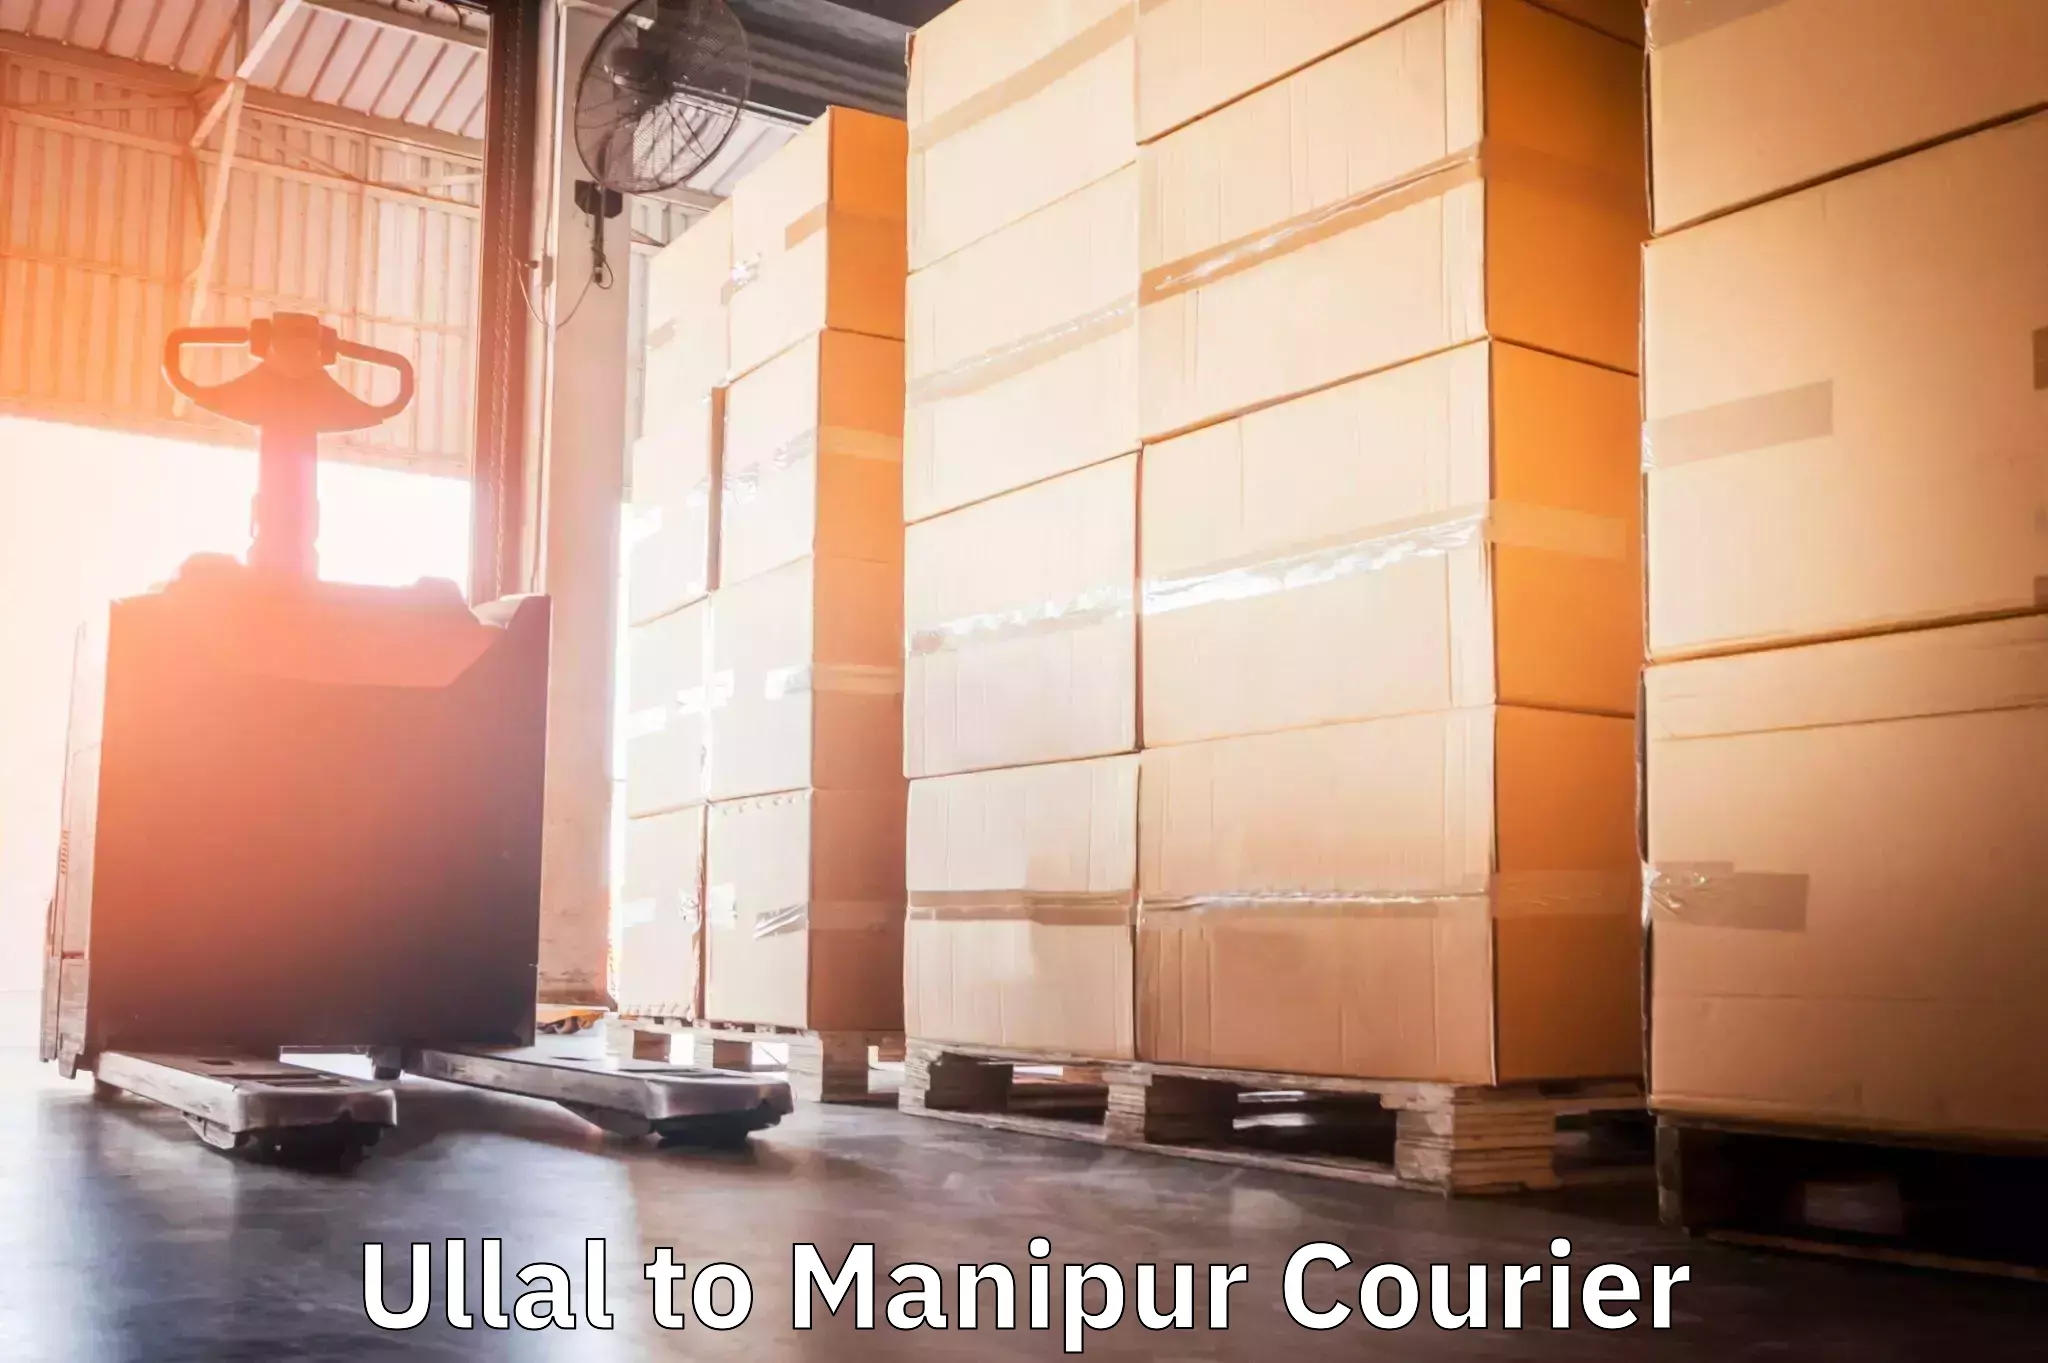 State-of-the-art courier technology Ullal to Manipur